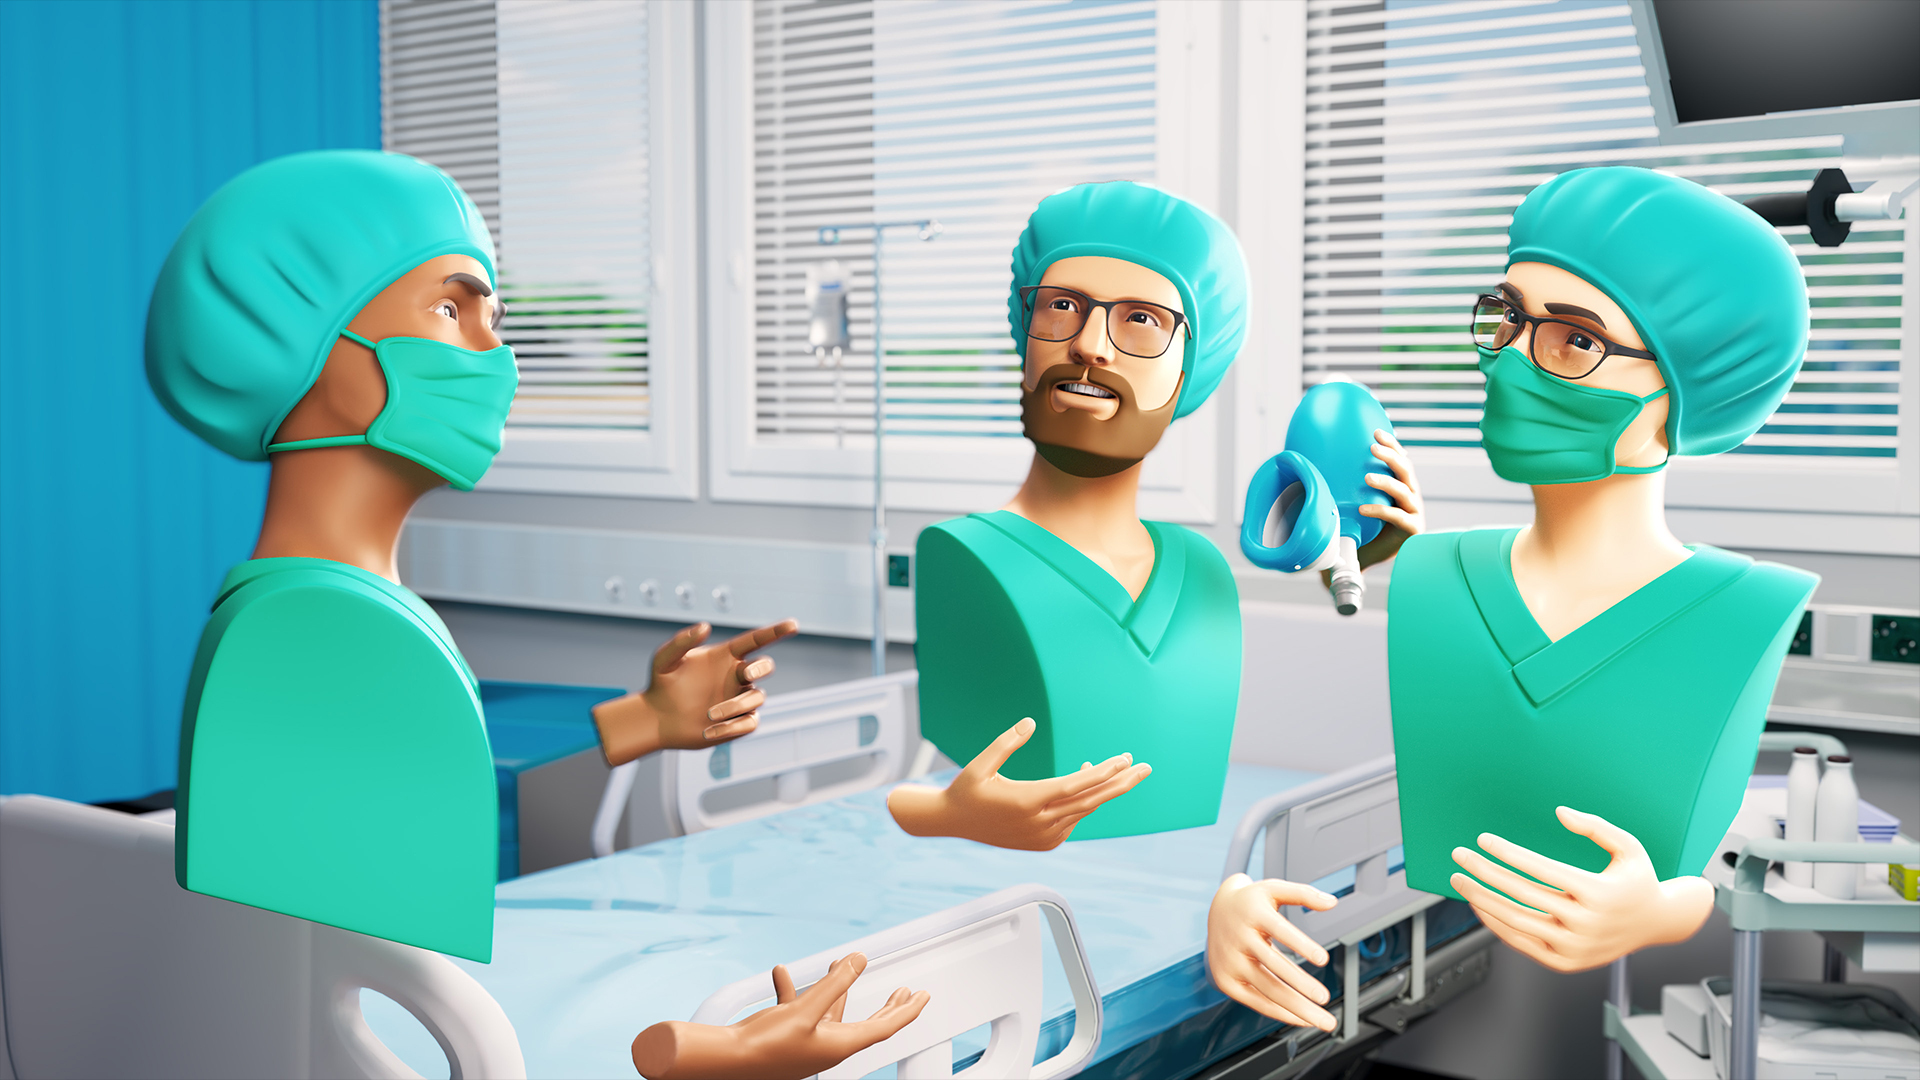 VR for Healthcare